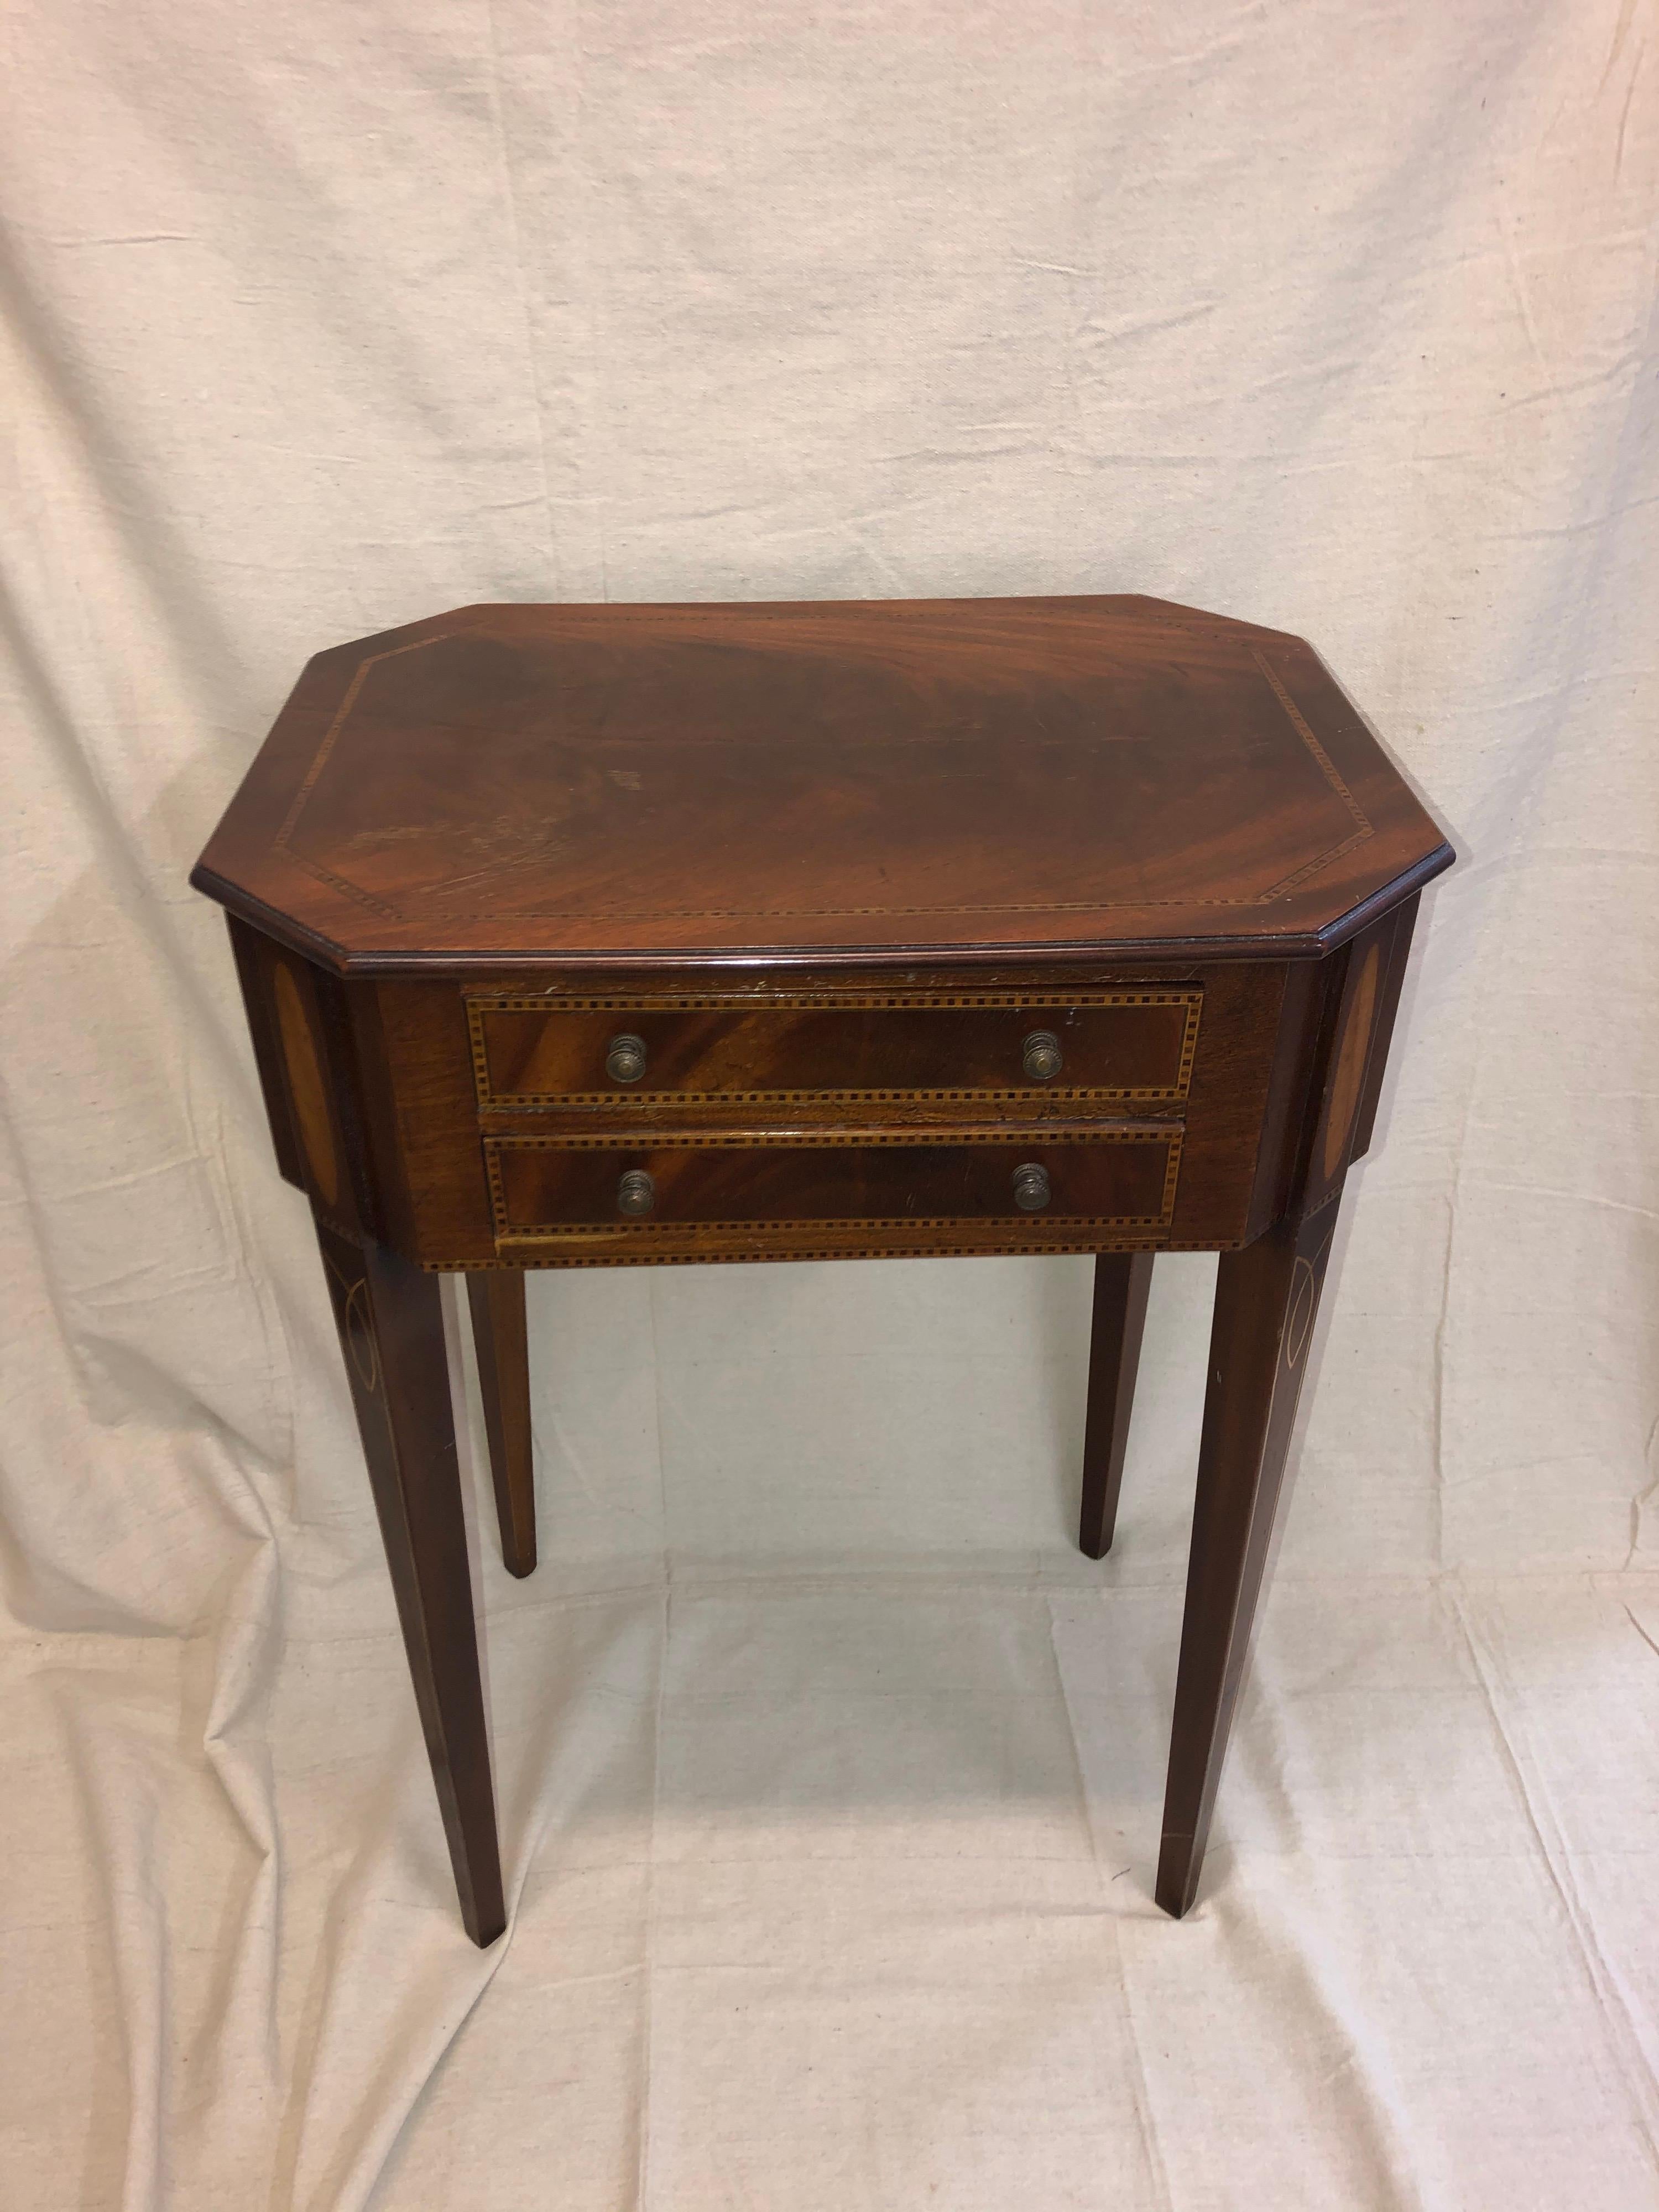 Sheraton end table or 
nightstands.
The tabletop have octagonal base containing two drawers supported on 
four square tapering satinwood inlaid legs.
Size: 29” H x 21” W x 16”.
   